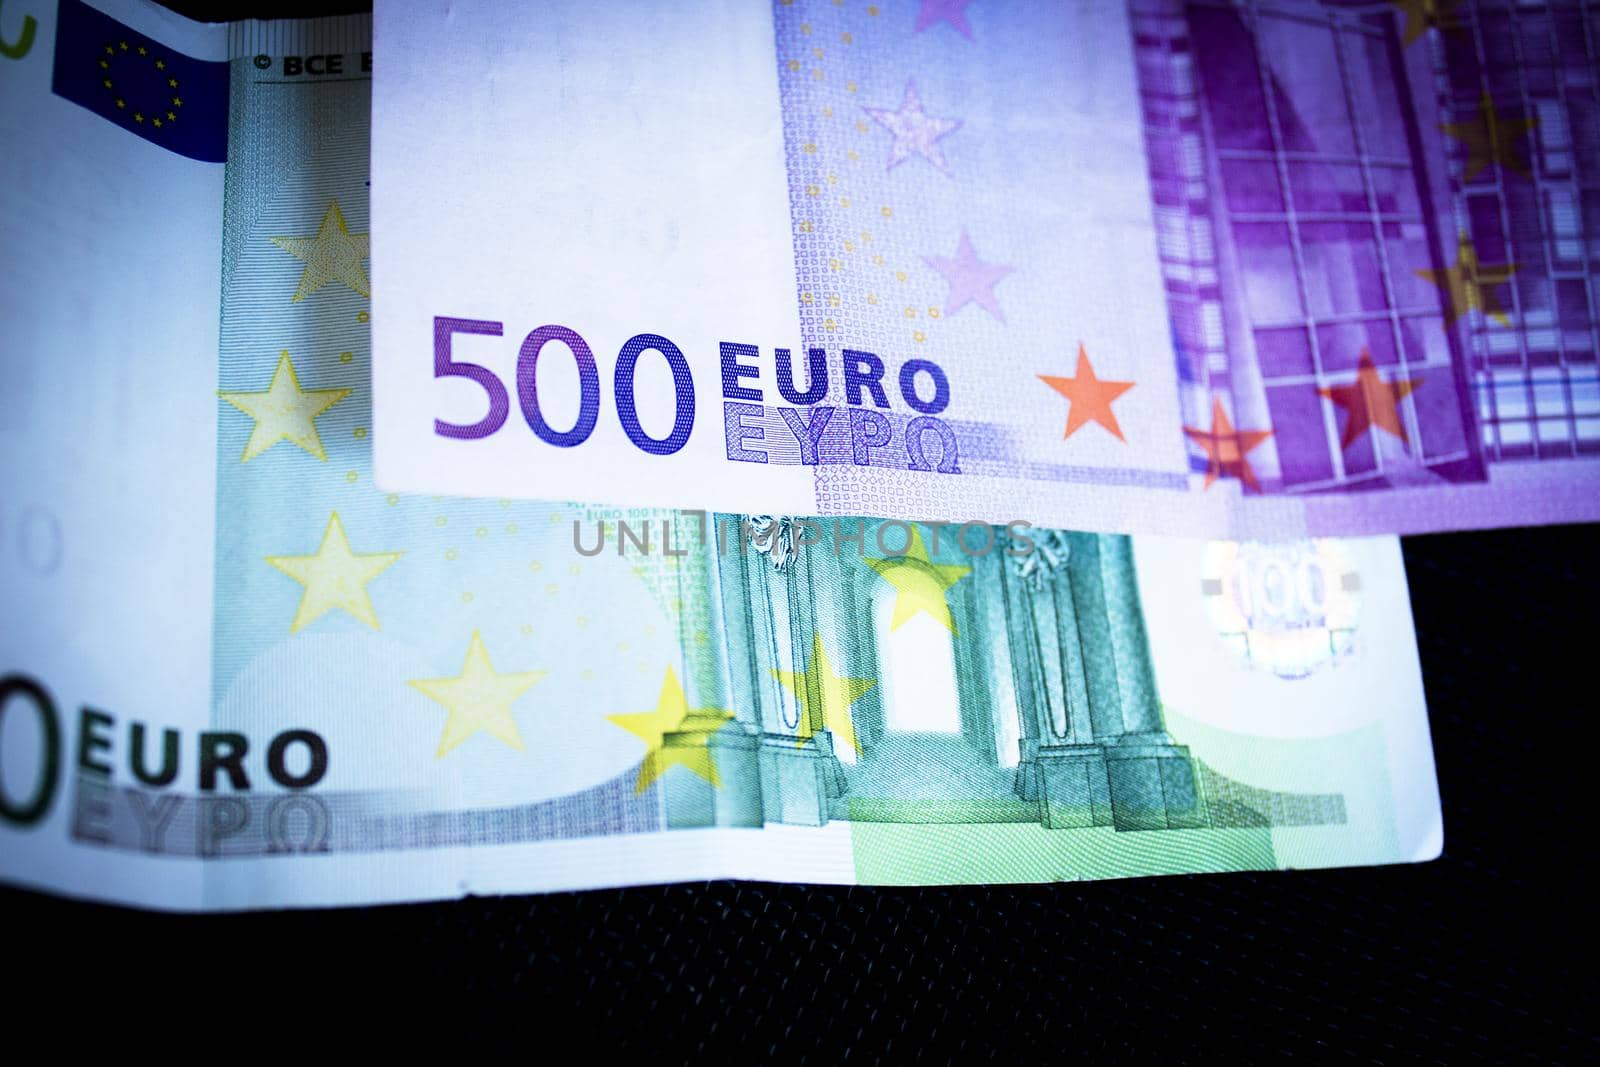 500 and 100 euros in official banknotes. No people